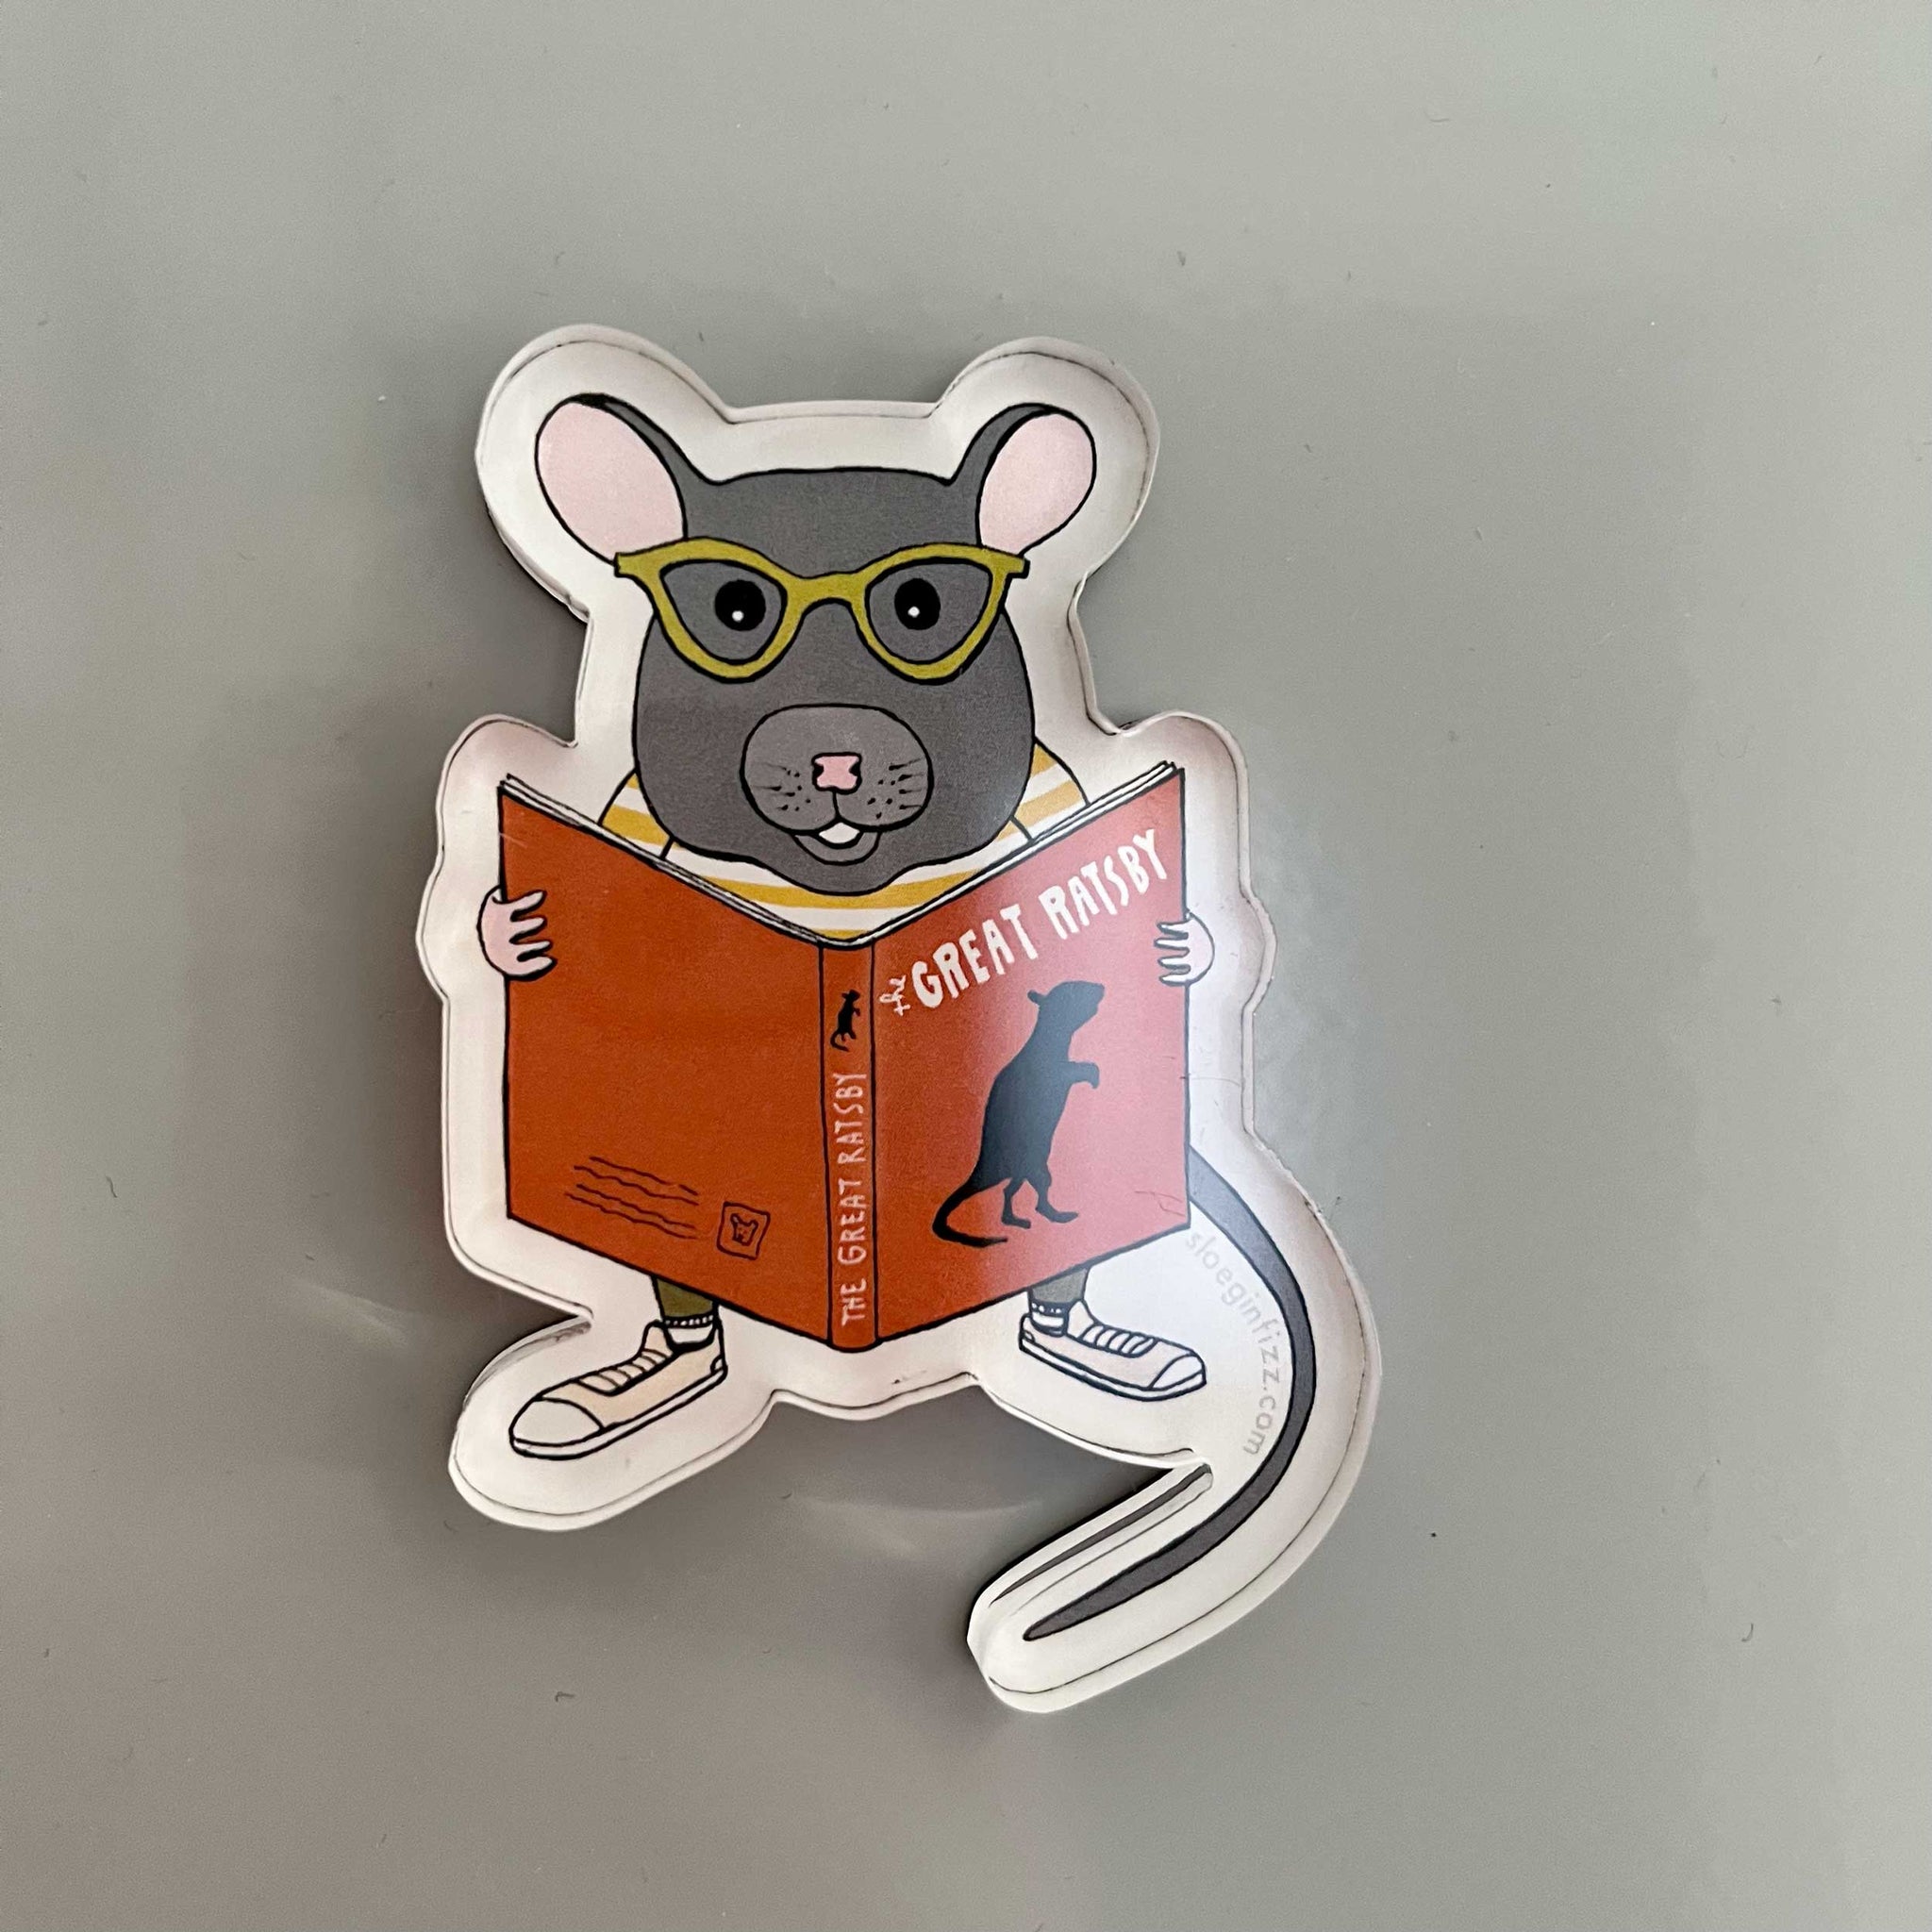 The Great Ratsby Refrigerator Magnet